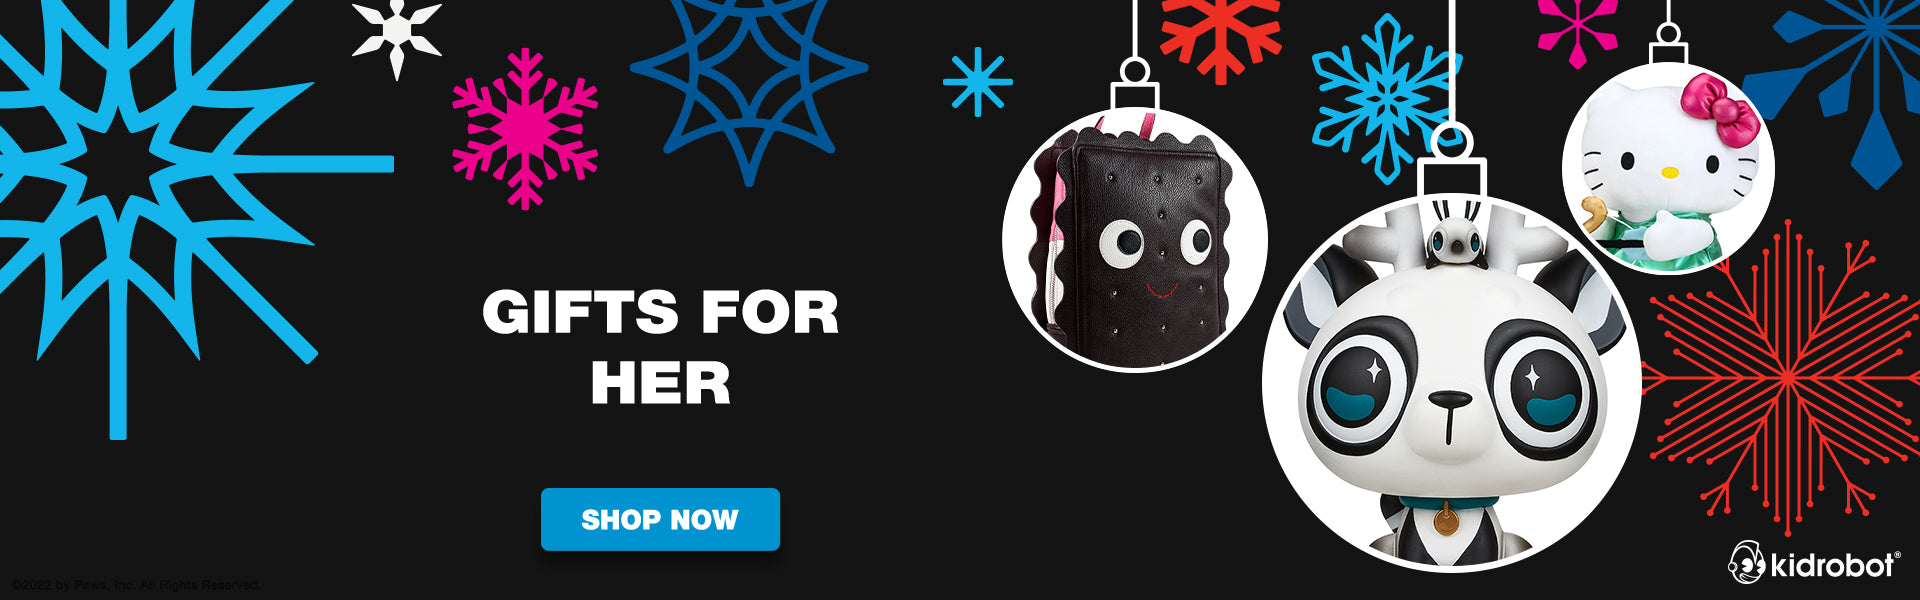 Best Gifts for Her at Kidrobot.com